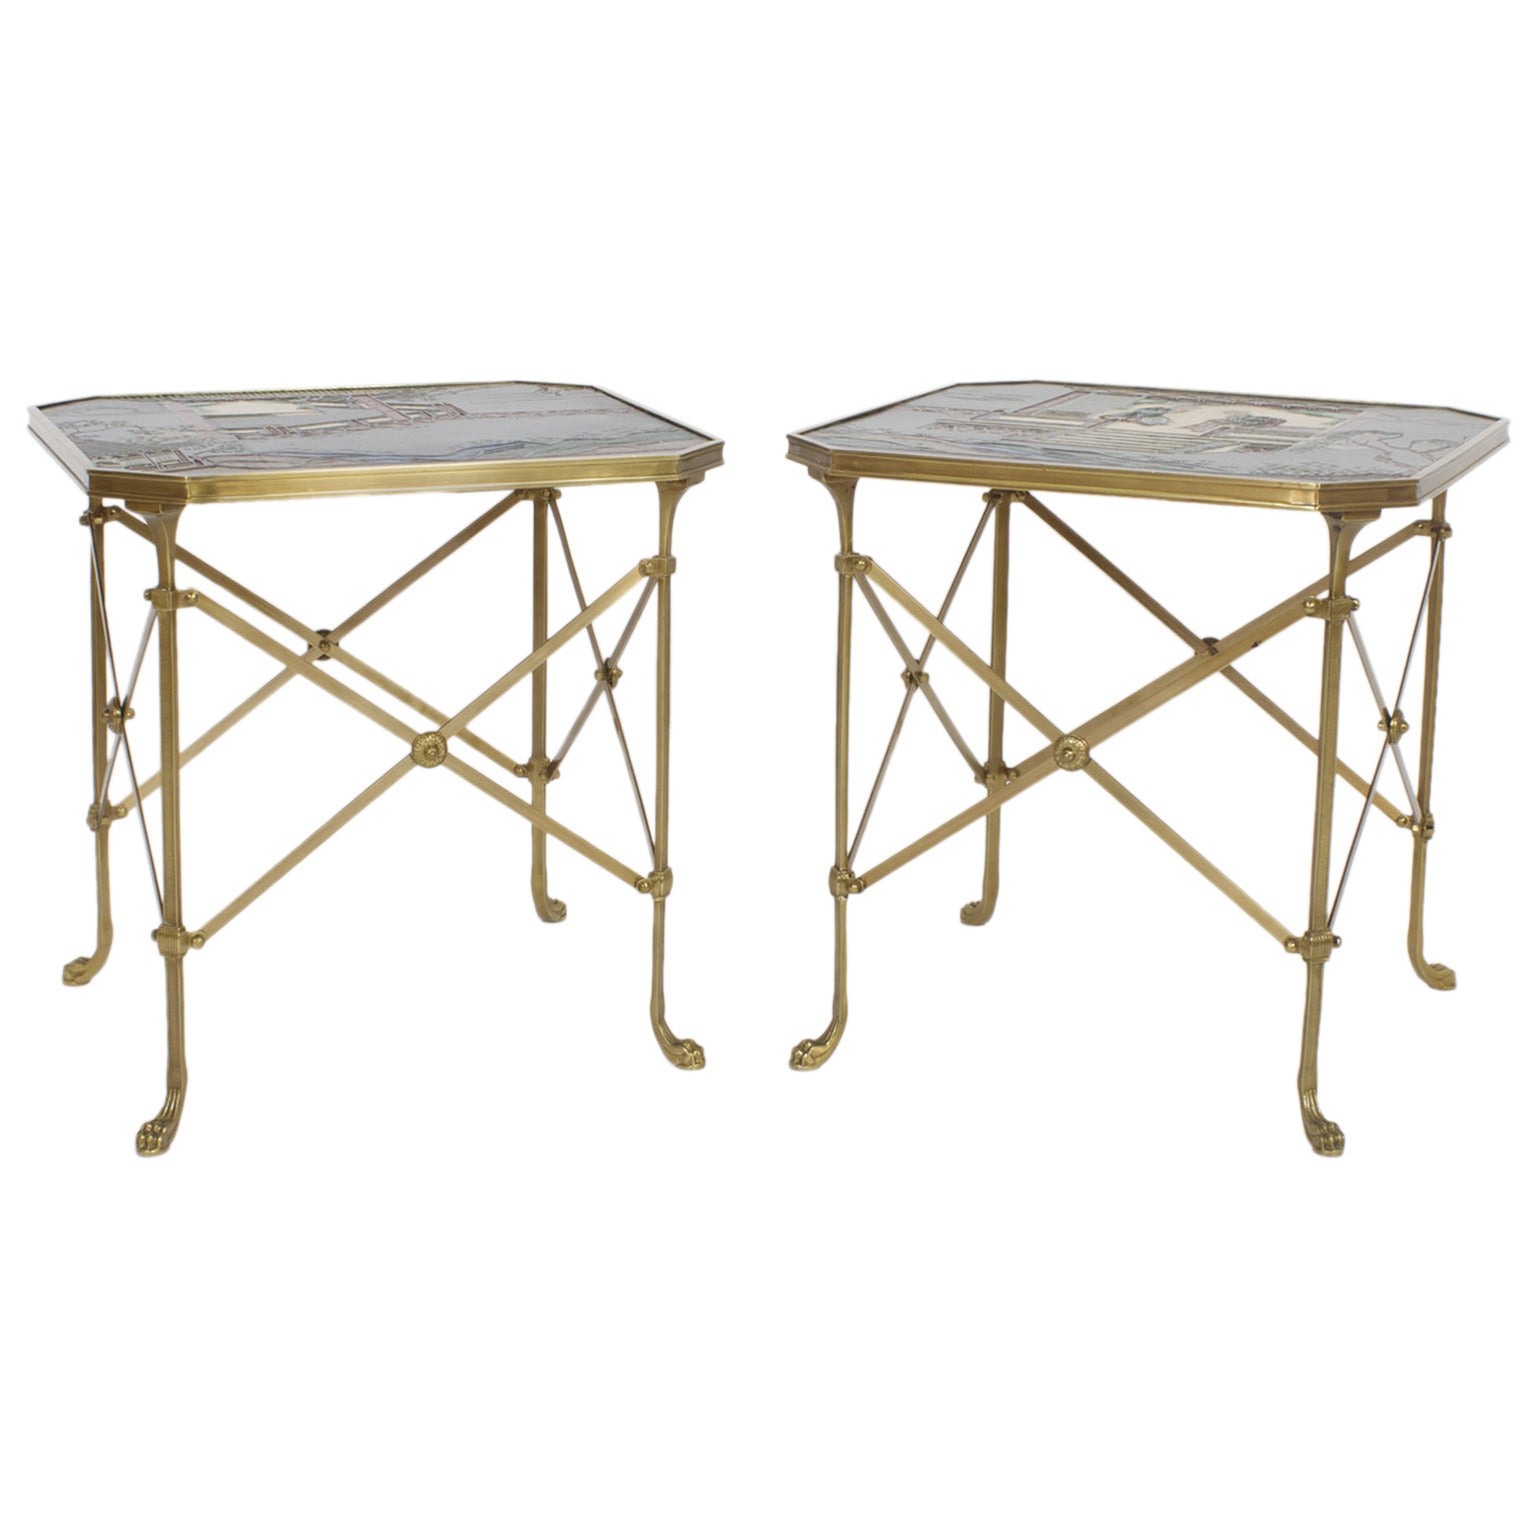 Pair of Neoclassical Style Chinoiserie Tables in the Jansen Manner